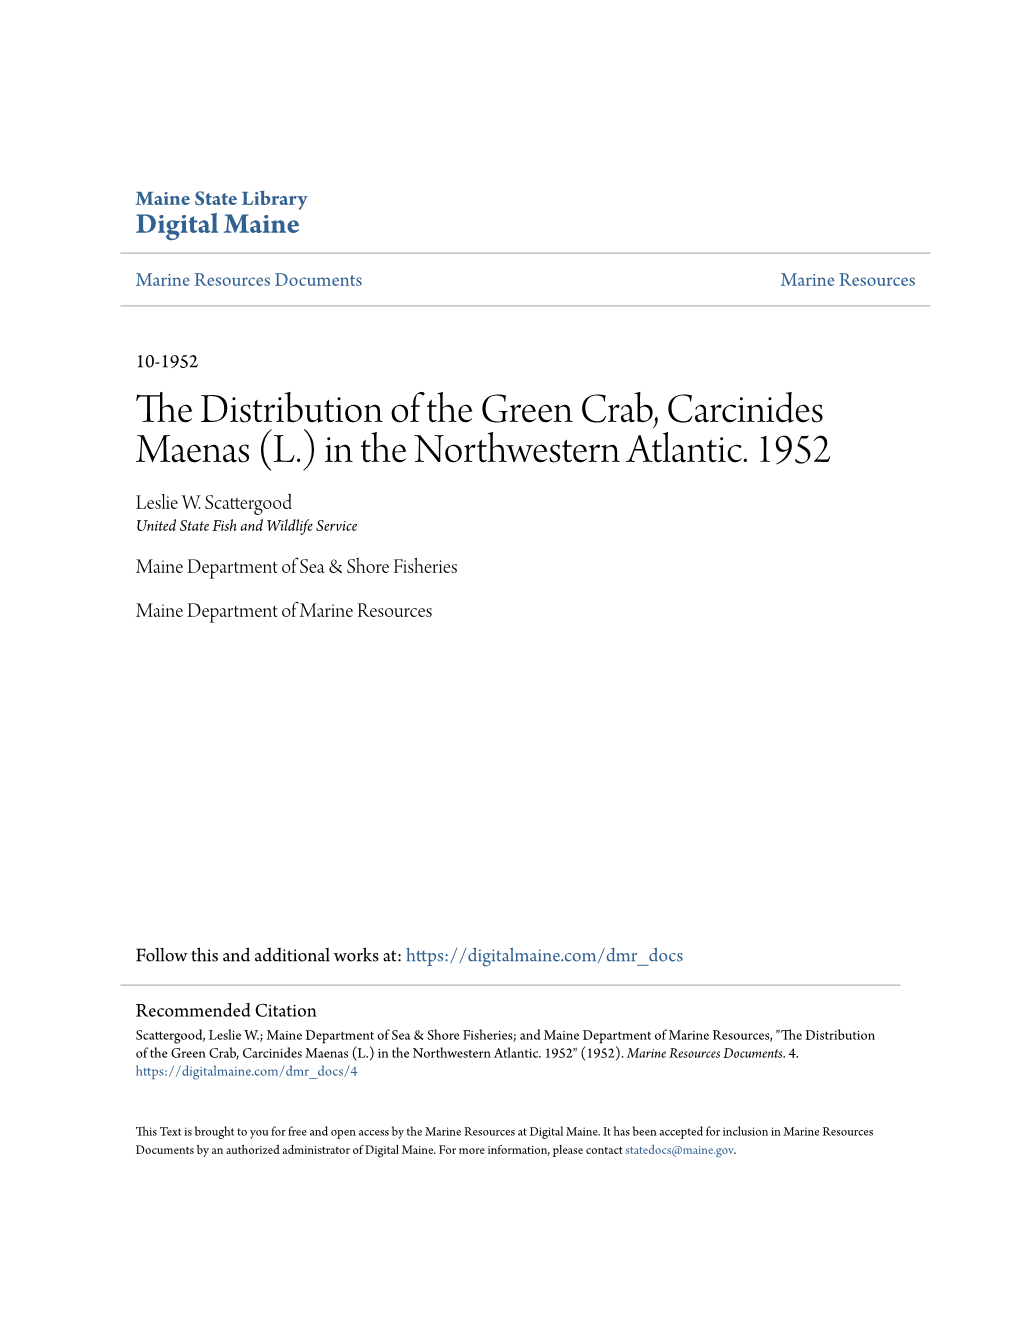 The Distribution of the Green Crab, Carcinides Maenas (L.) in the Northwestern Atlantic